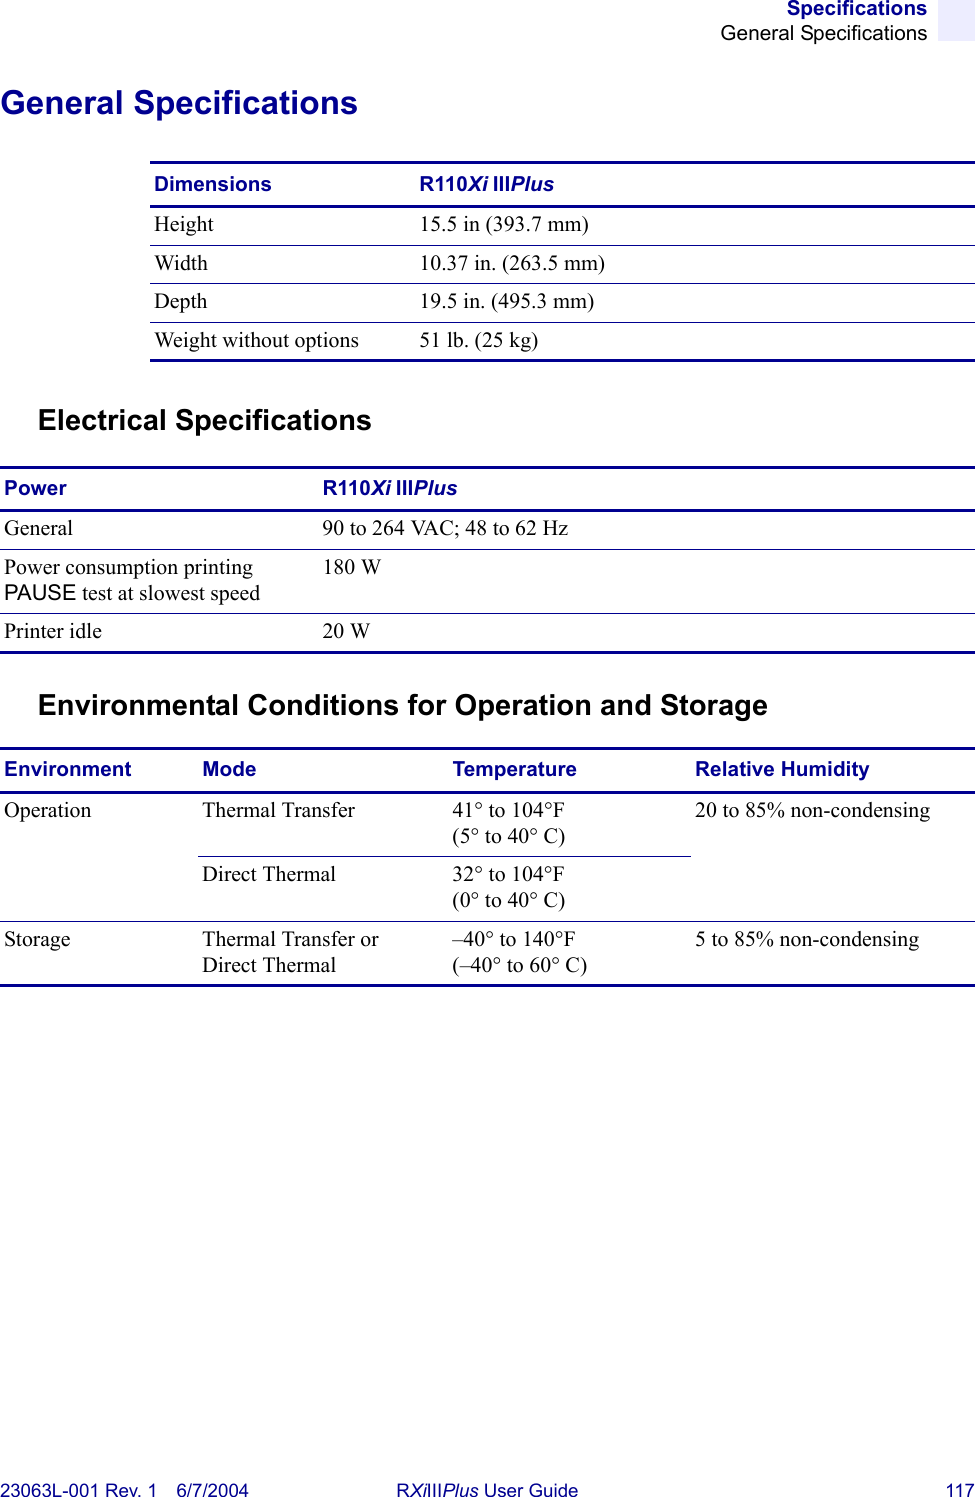 SpecificationsGeneral Specifications23063L-001 Rev. 1 6/7/2004 RXiIIIPlus User Guide 117General SpecificationsElectrical SpecificationsEnvironmental Conditions for Operation and StorageDimensions R110Xi IIIPlusHeight 15.5 in (393.7 mm)Width 10.37 in. (263.5 mm)Depth 19.5 in. (495.3 mm)Weight without options 51 lb. (25 kg)Power R110Xi IIIPlusGeneral 90 to 264 VAC; 48 to 62 HzPower consumption printing PAUSE test at slowest speed180 WPrinter idle 20 WEnvironment Mode Temperature Relative HumidityOperation  Thermal Transfer 41° to 104°F(5° to 40° C)20 to 85% non-condensingDirect Thermal 32° to 104°F(0° to 40° C)Storage Thermal Transfer or Direct Thermal–40° to 140°F(–40° to 60° C)5 to 85% non-condensing